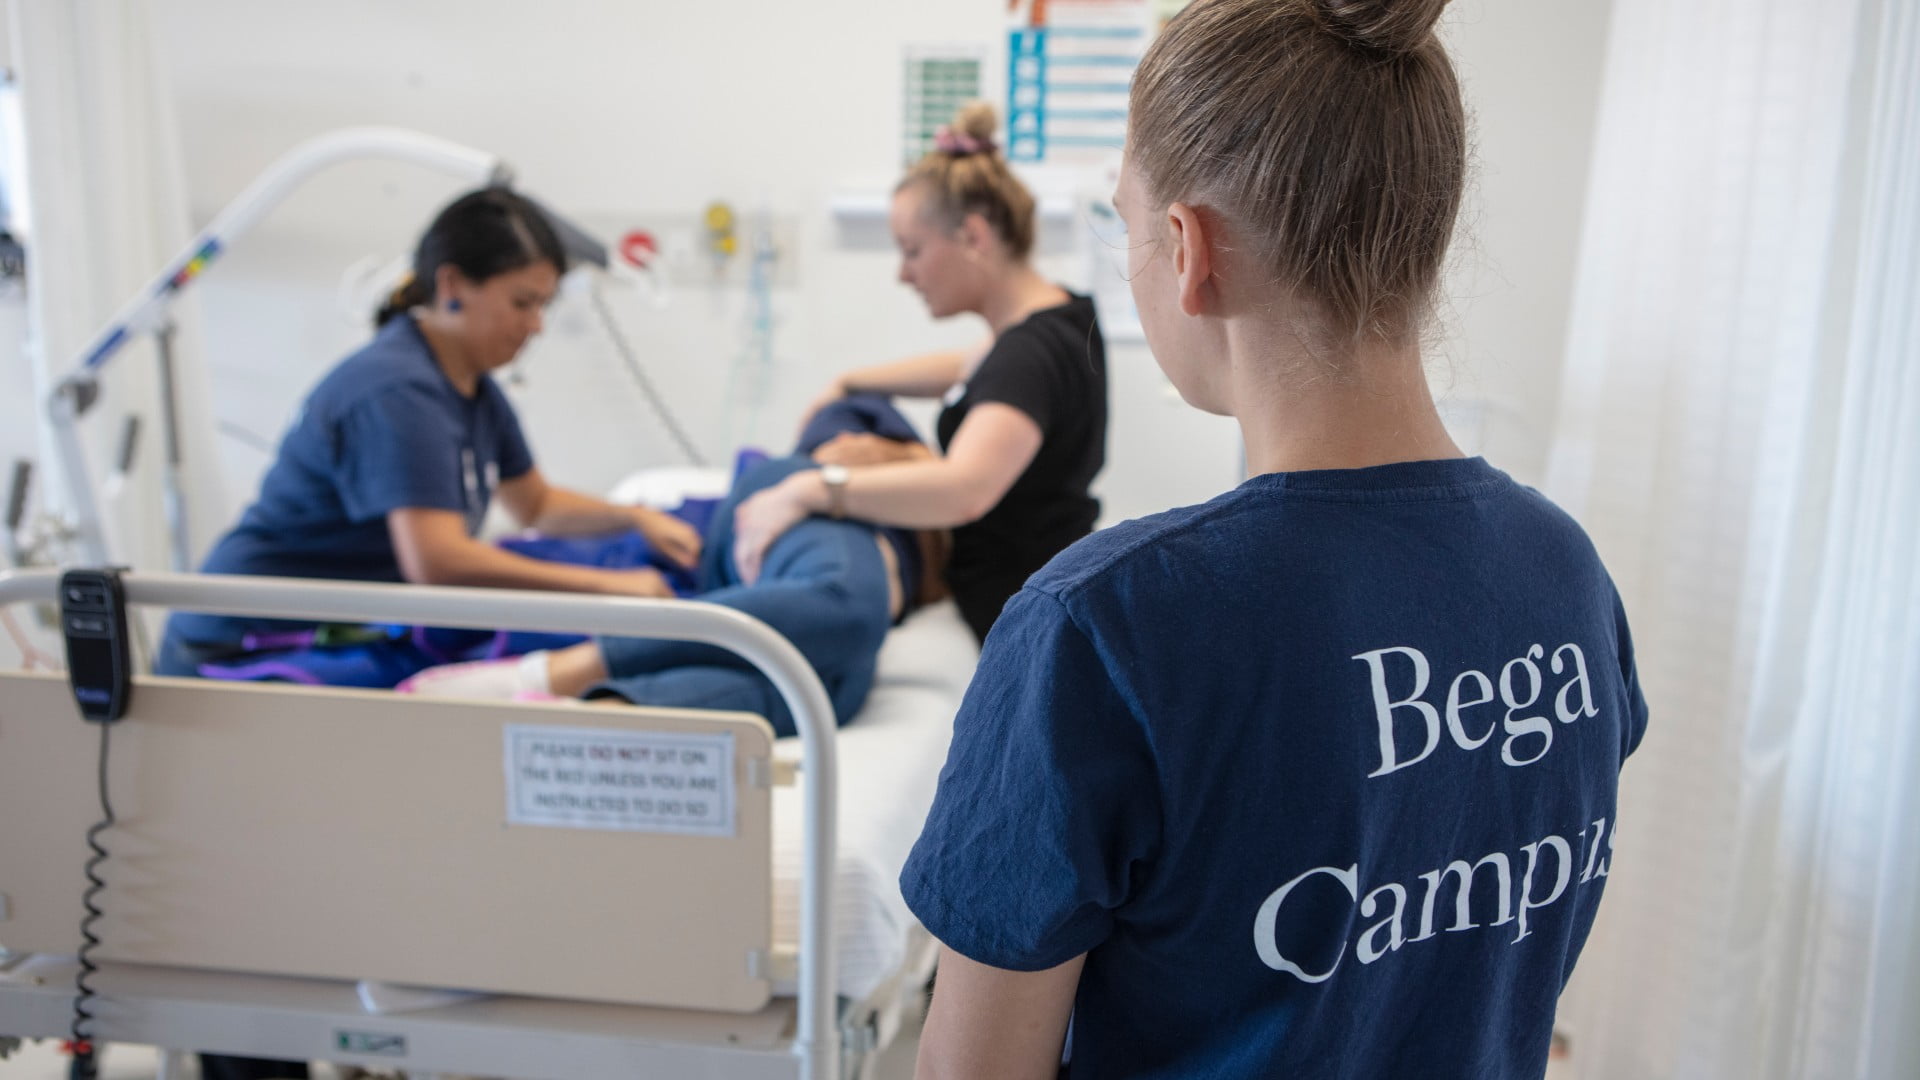 Three students take part in exercises in the nursing labs at Bega. Photo: Paul Jones